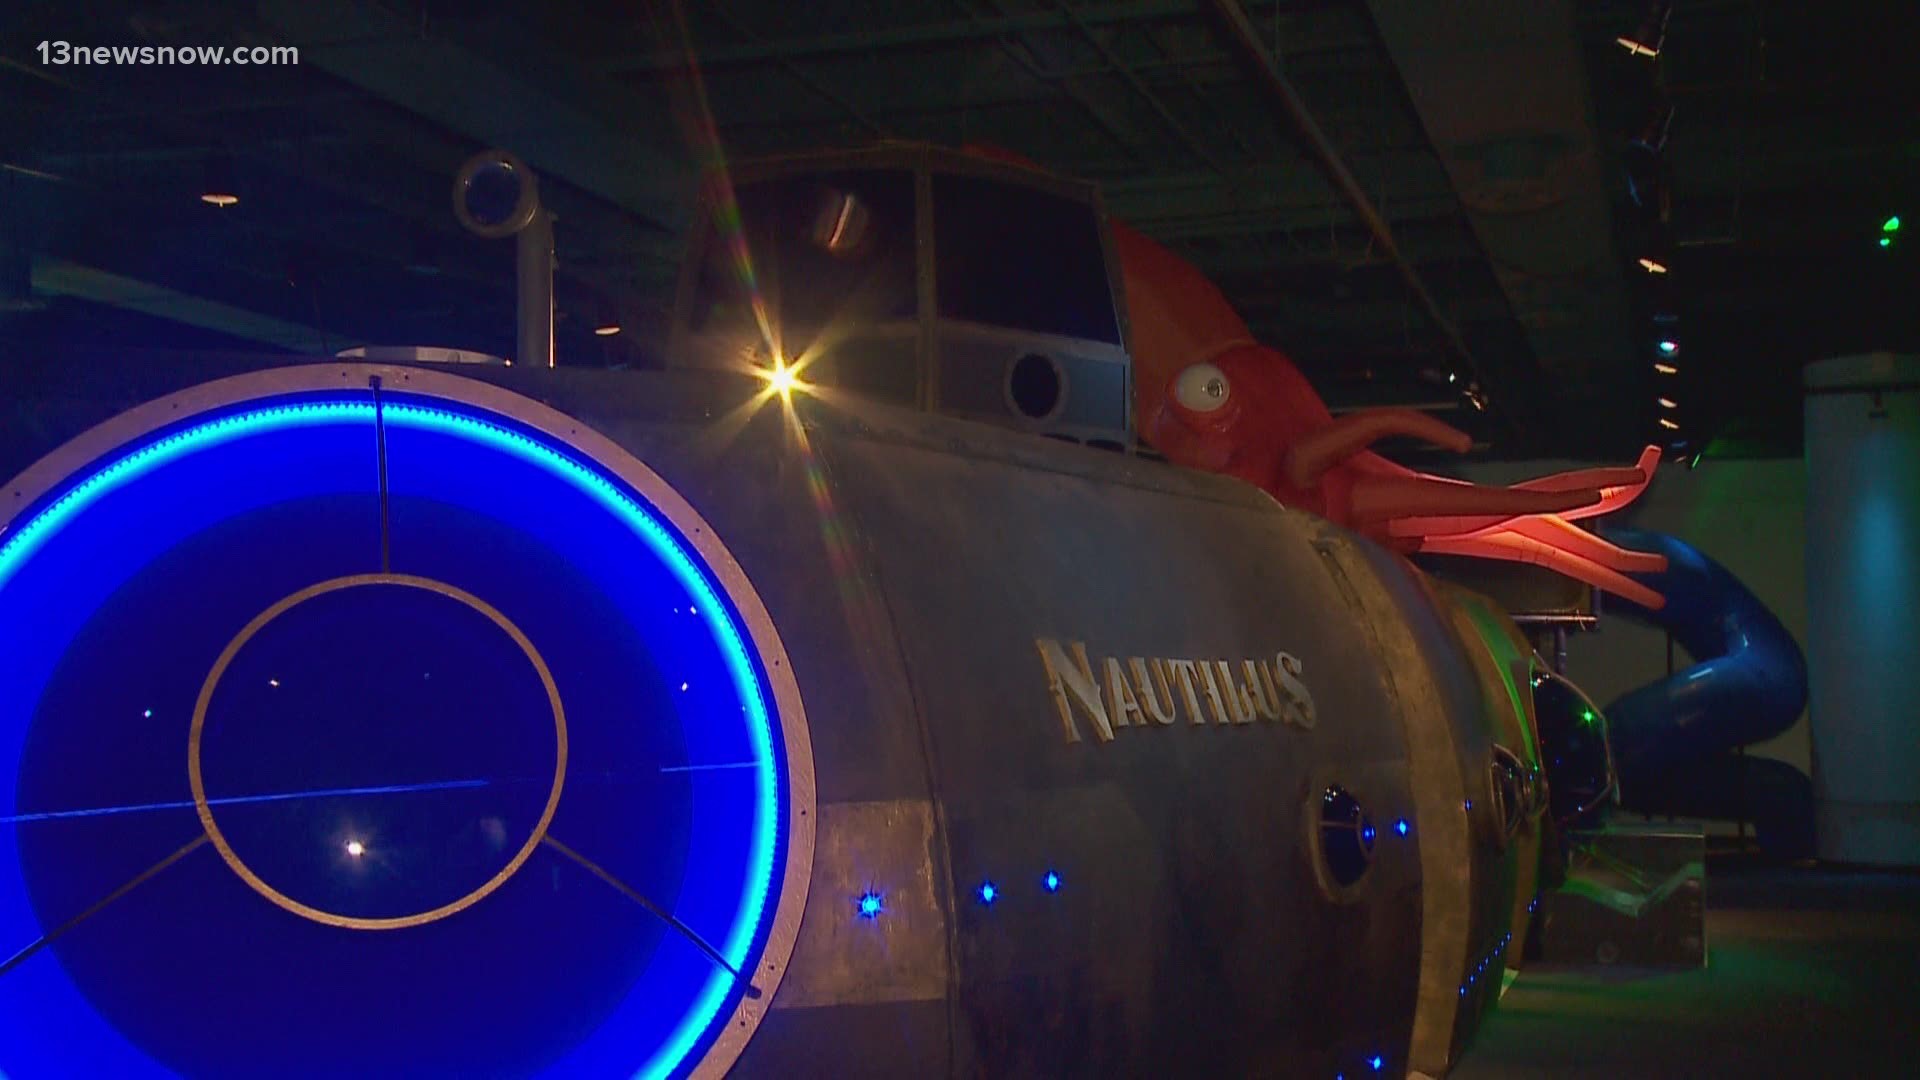 Nauticus hosted a Deep Ocean Exhibition that made its first debut in the U.S. 13News Now Madison Kimbro got an inside look at "Voyage to the Deep."